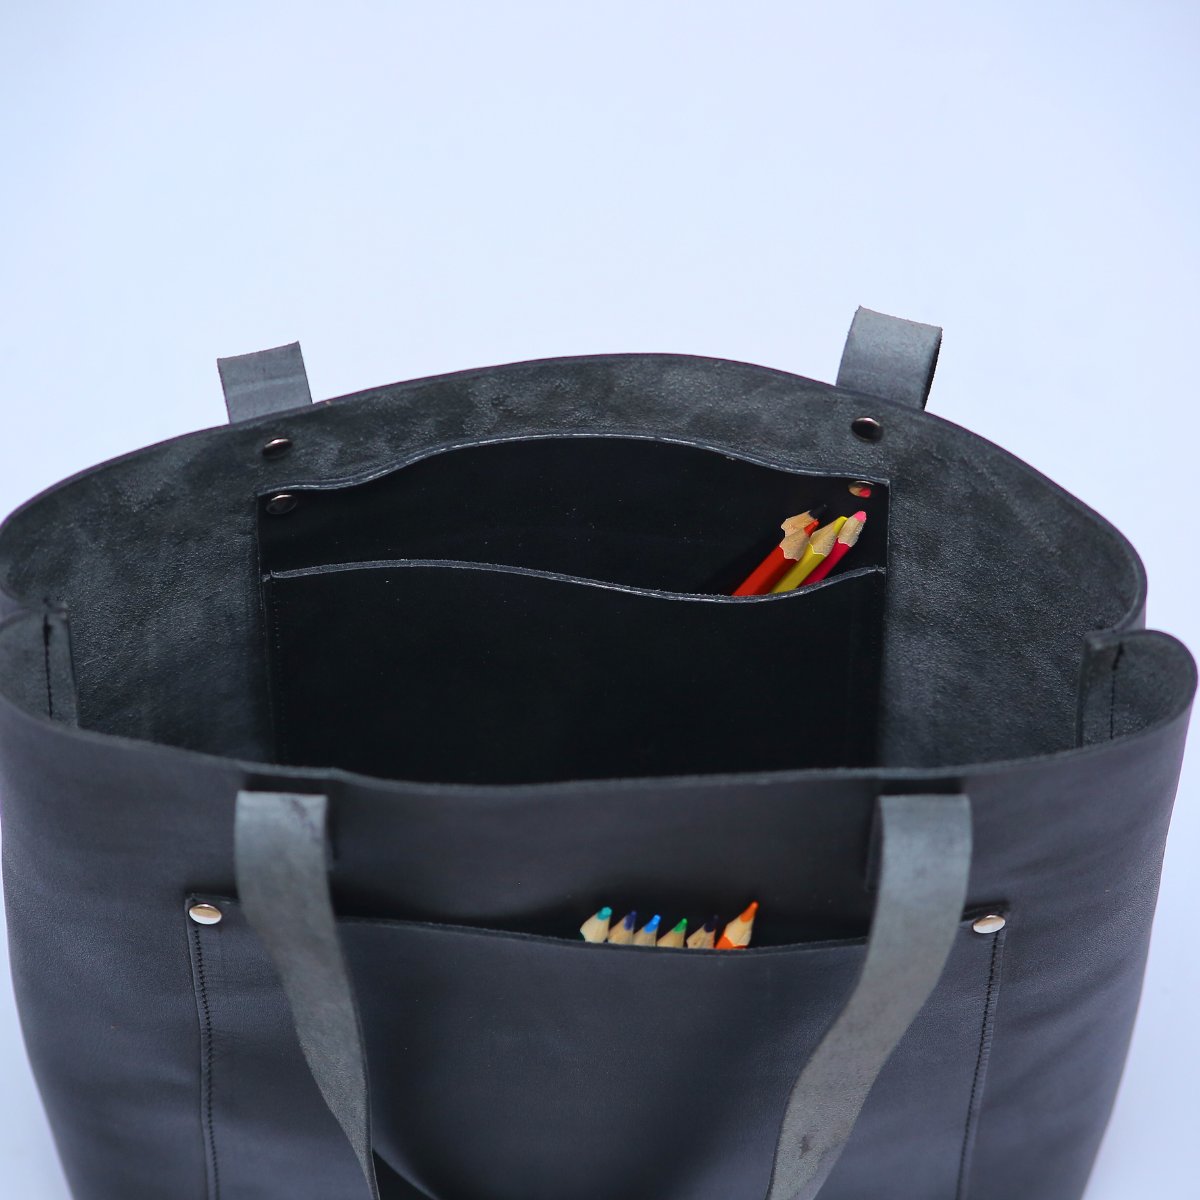 'Upgrade Your Carry-All Game with Our Exquisite Leather Shoulder Tote Bag!'
#leatherrobe #leathertotebag #stylishbag #viralpost #blacktotebag